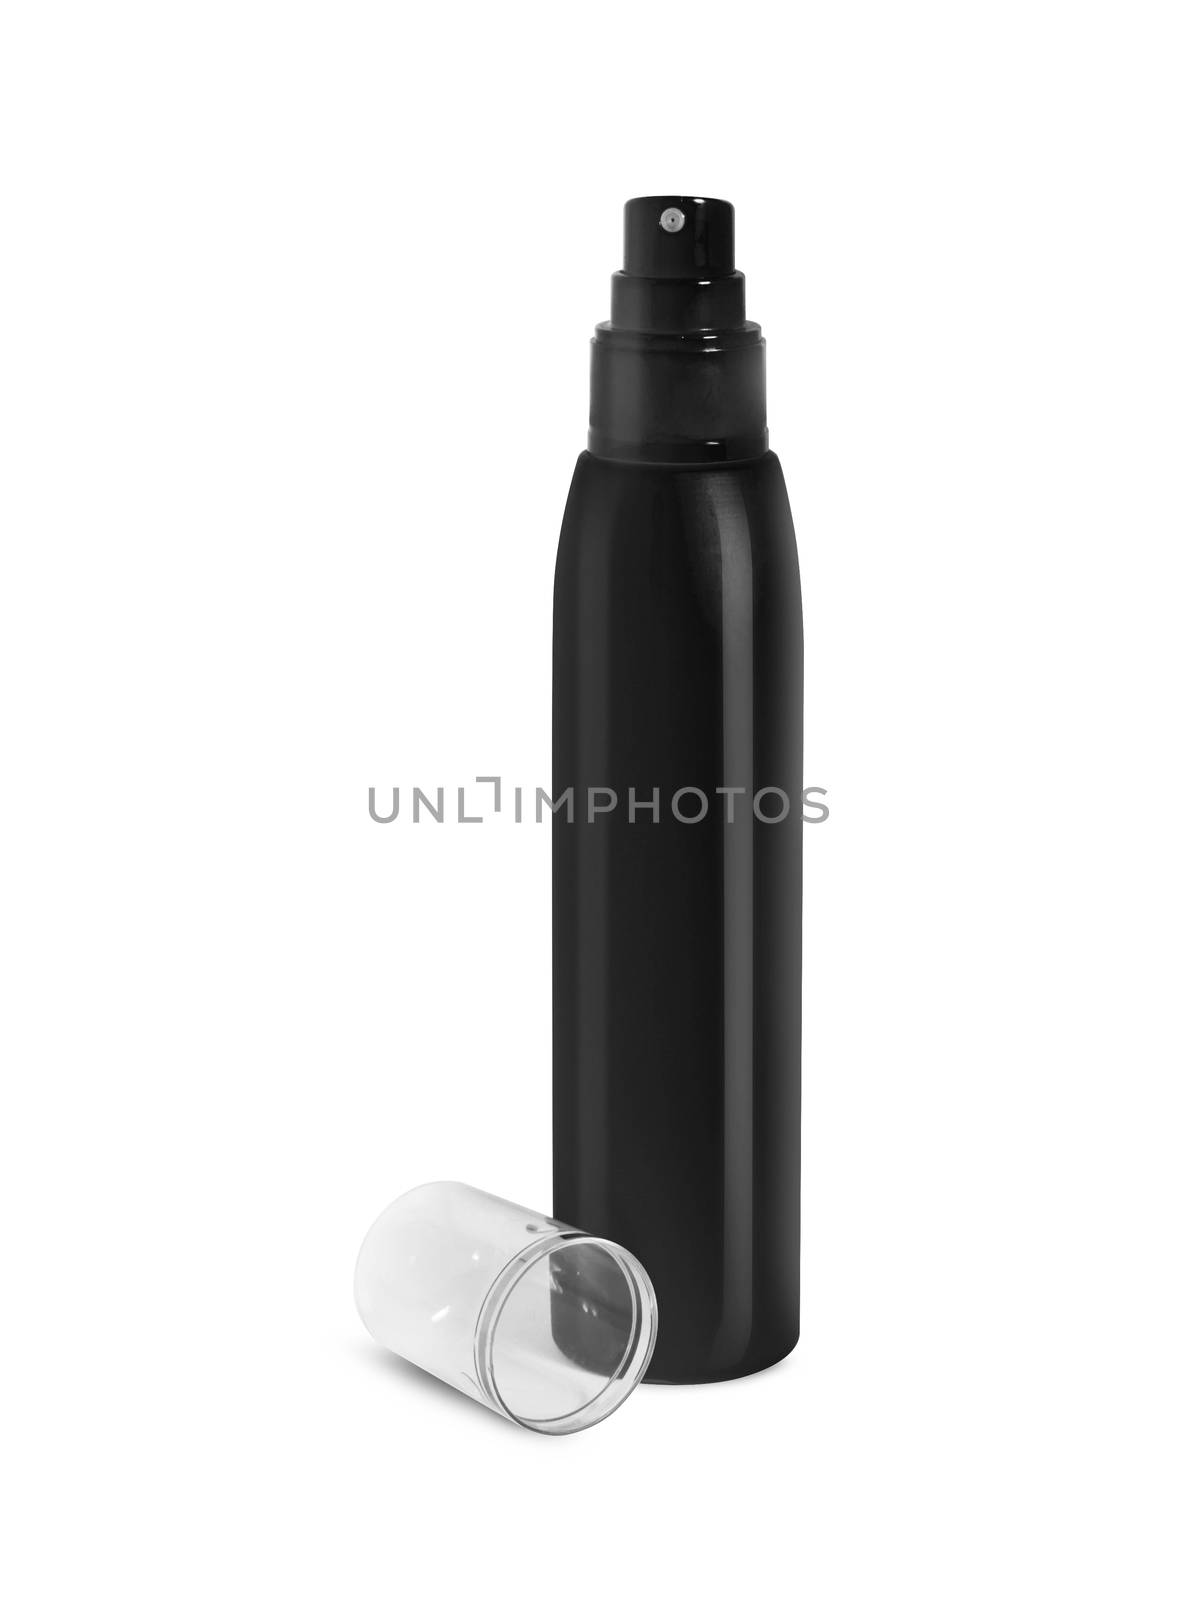 Black cosmetic spray bottle isolated on white background. With clipping path